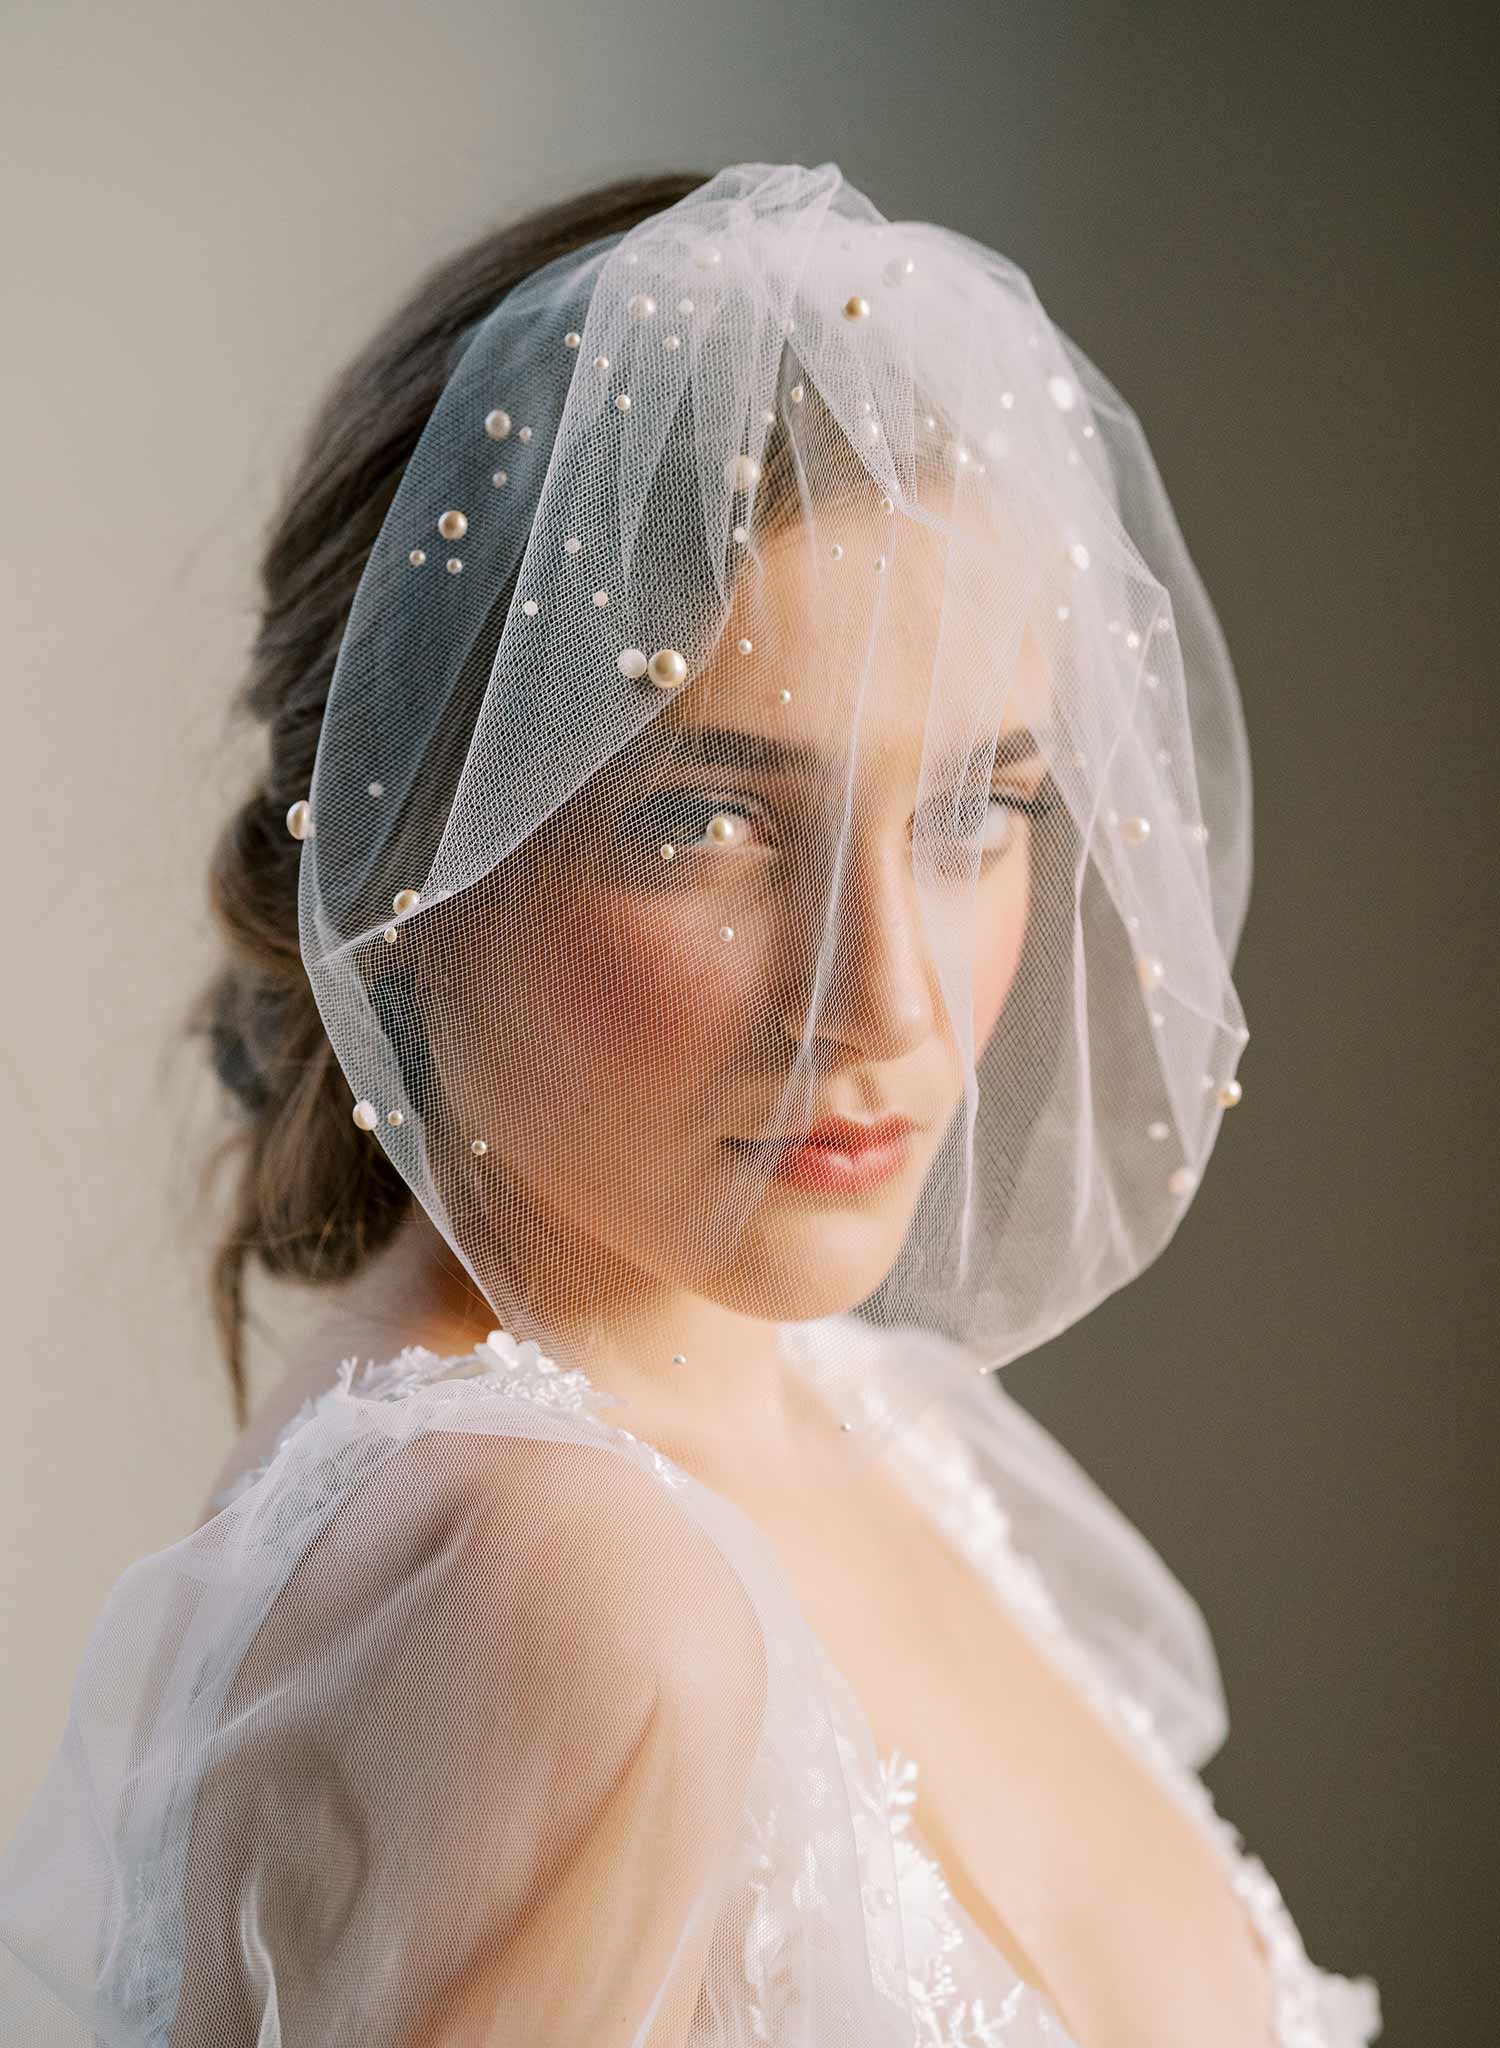 Full tulle birdcage veil with pearls - Style #2446